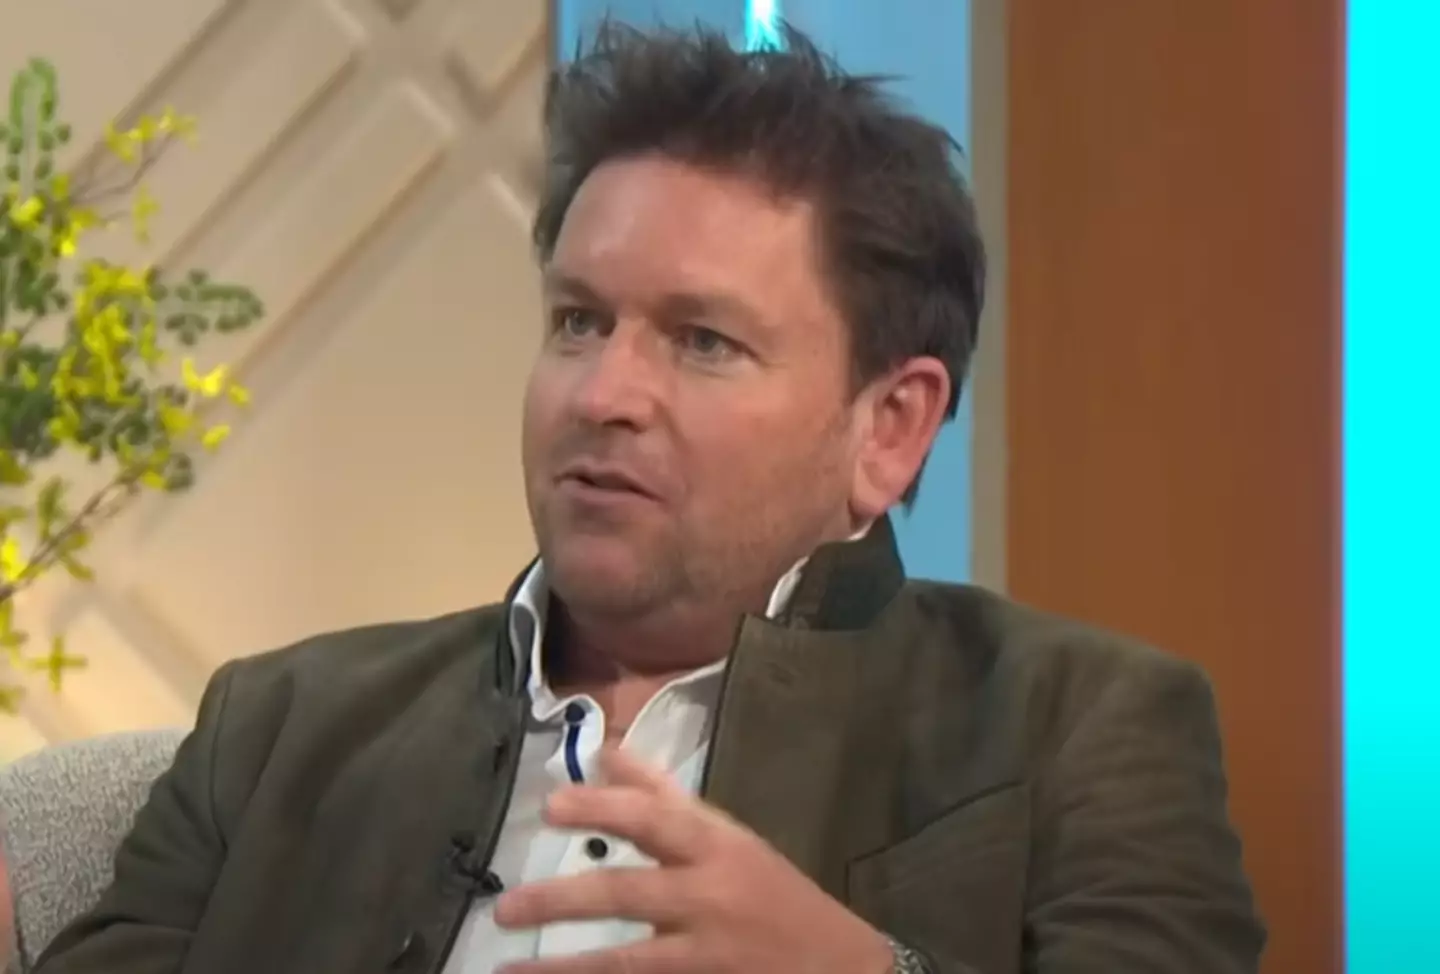 James Martin has been public about his cancer treatment.